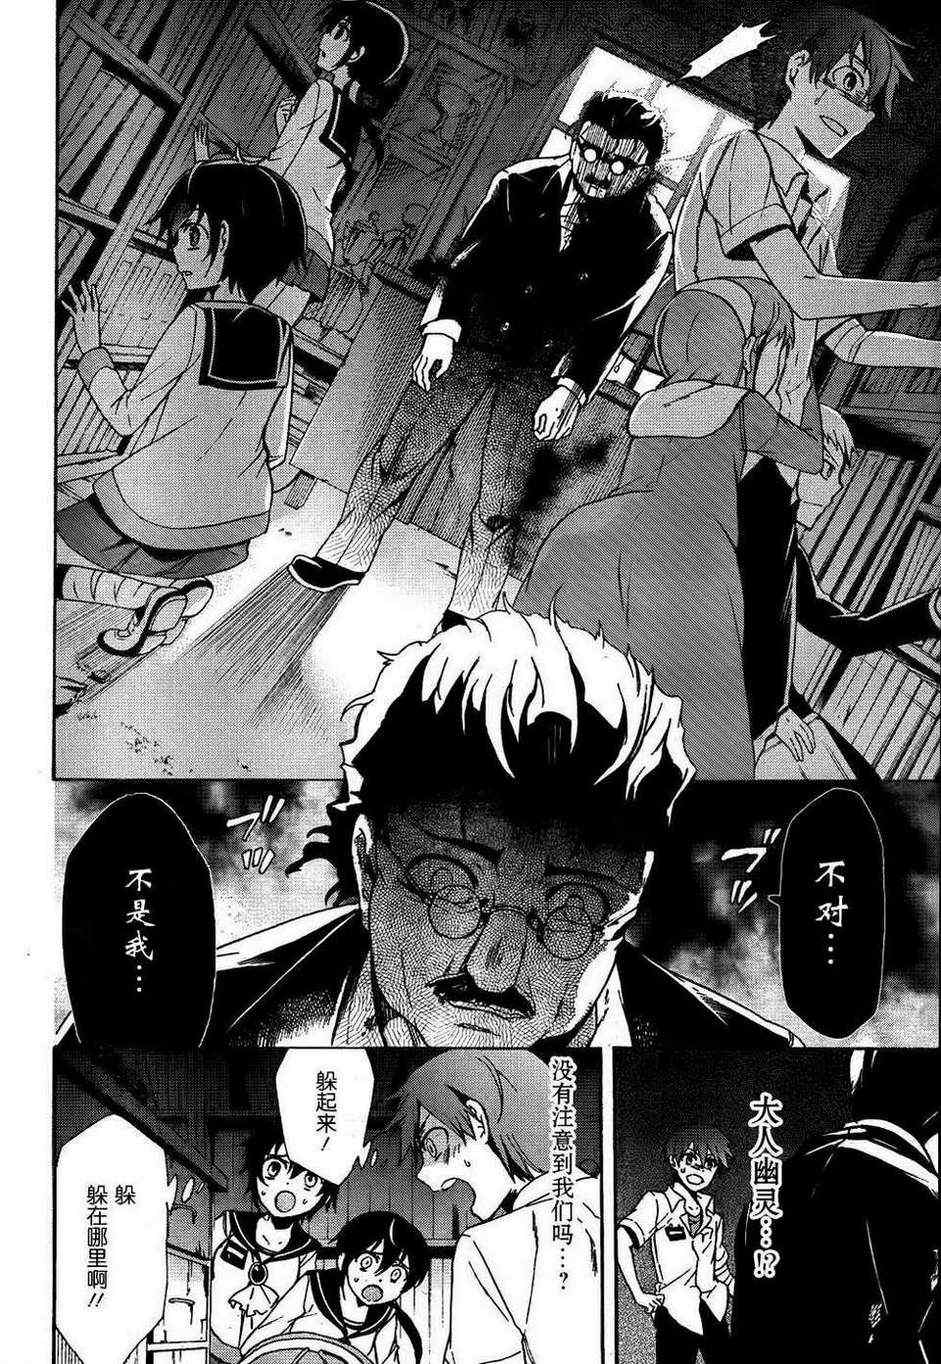 BLOOD_COVERED - 第39话 - 4